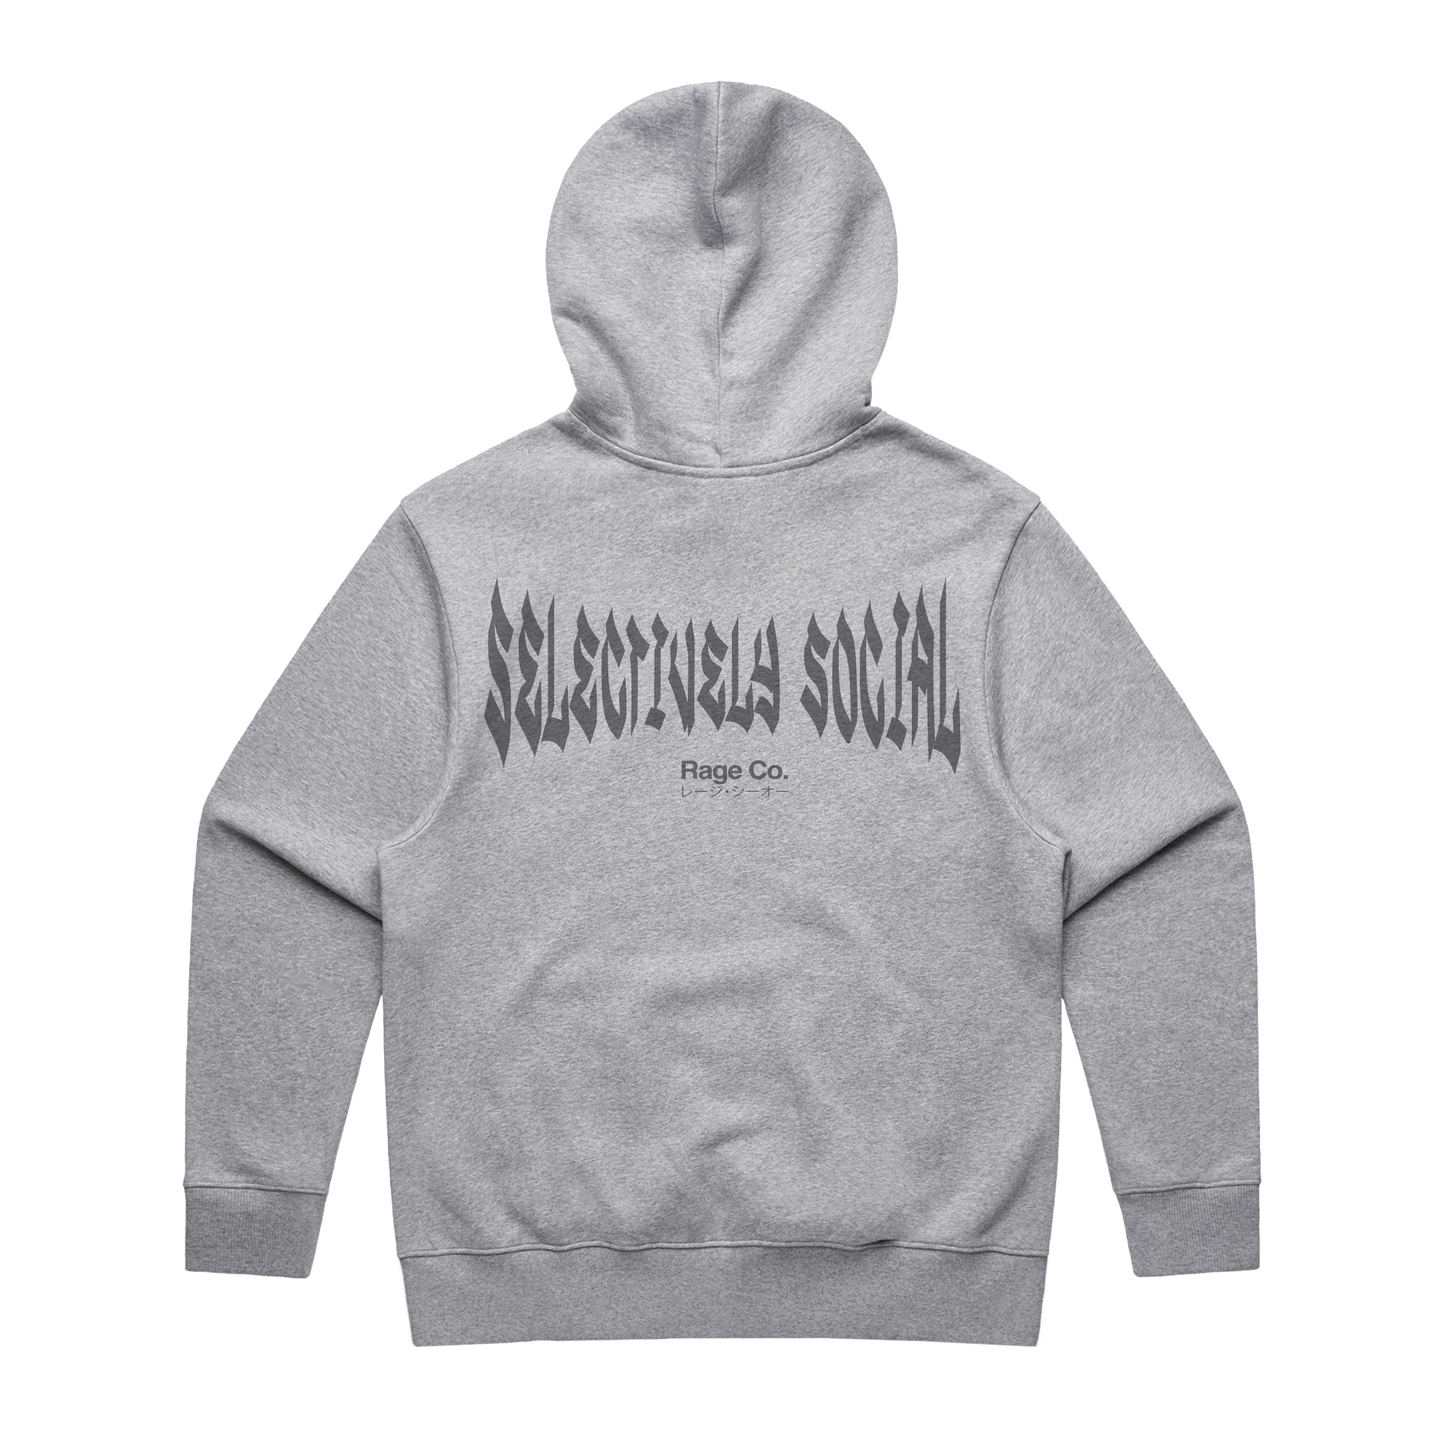 Selectively Social Heavyweight Hoodie